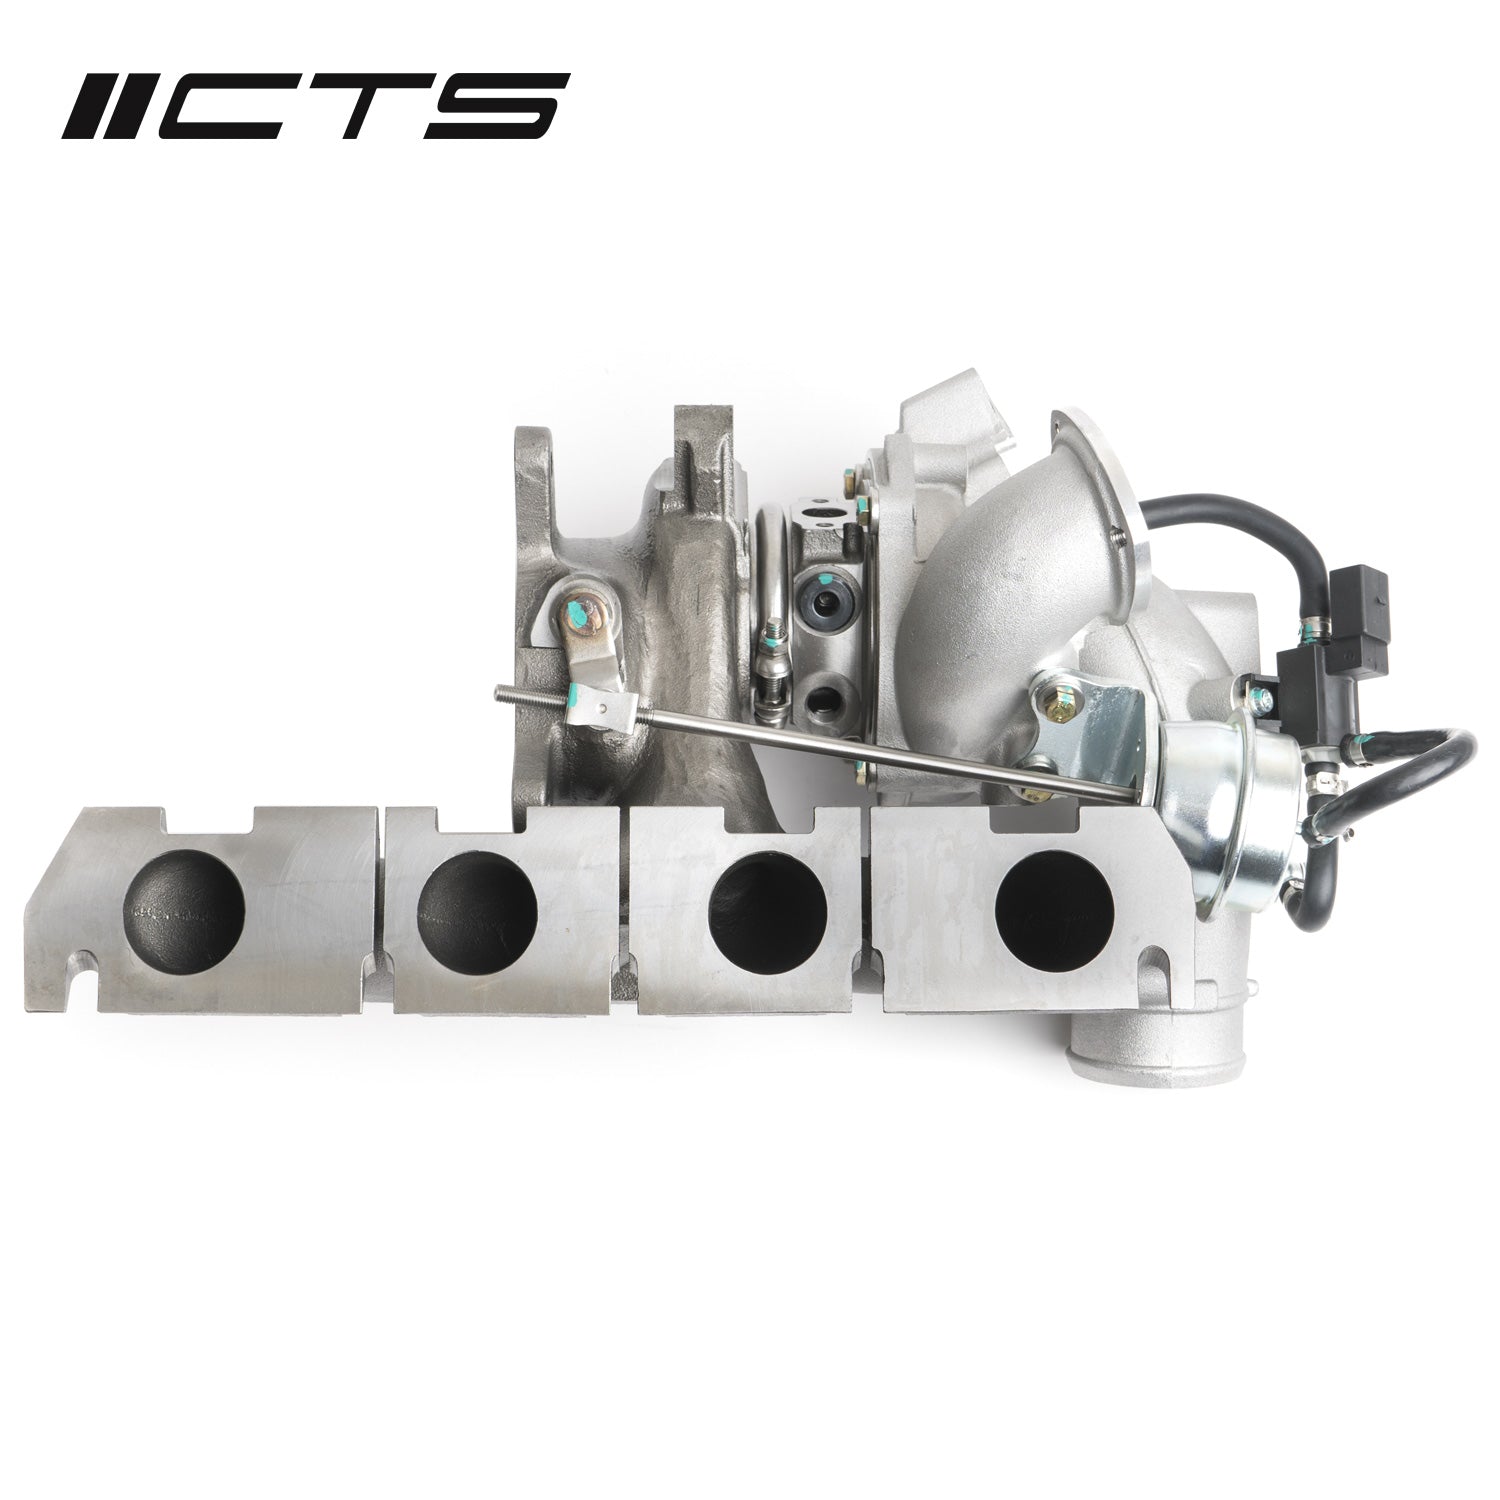 CTS TURBO K04-X HYBRID TURBOCHARGER FOR FSI AND TSI GEN1 ENGINES (EA113 AND EA888.1)